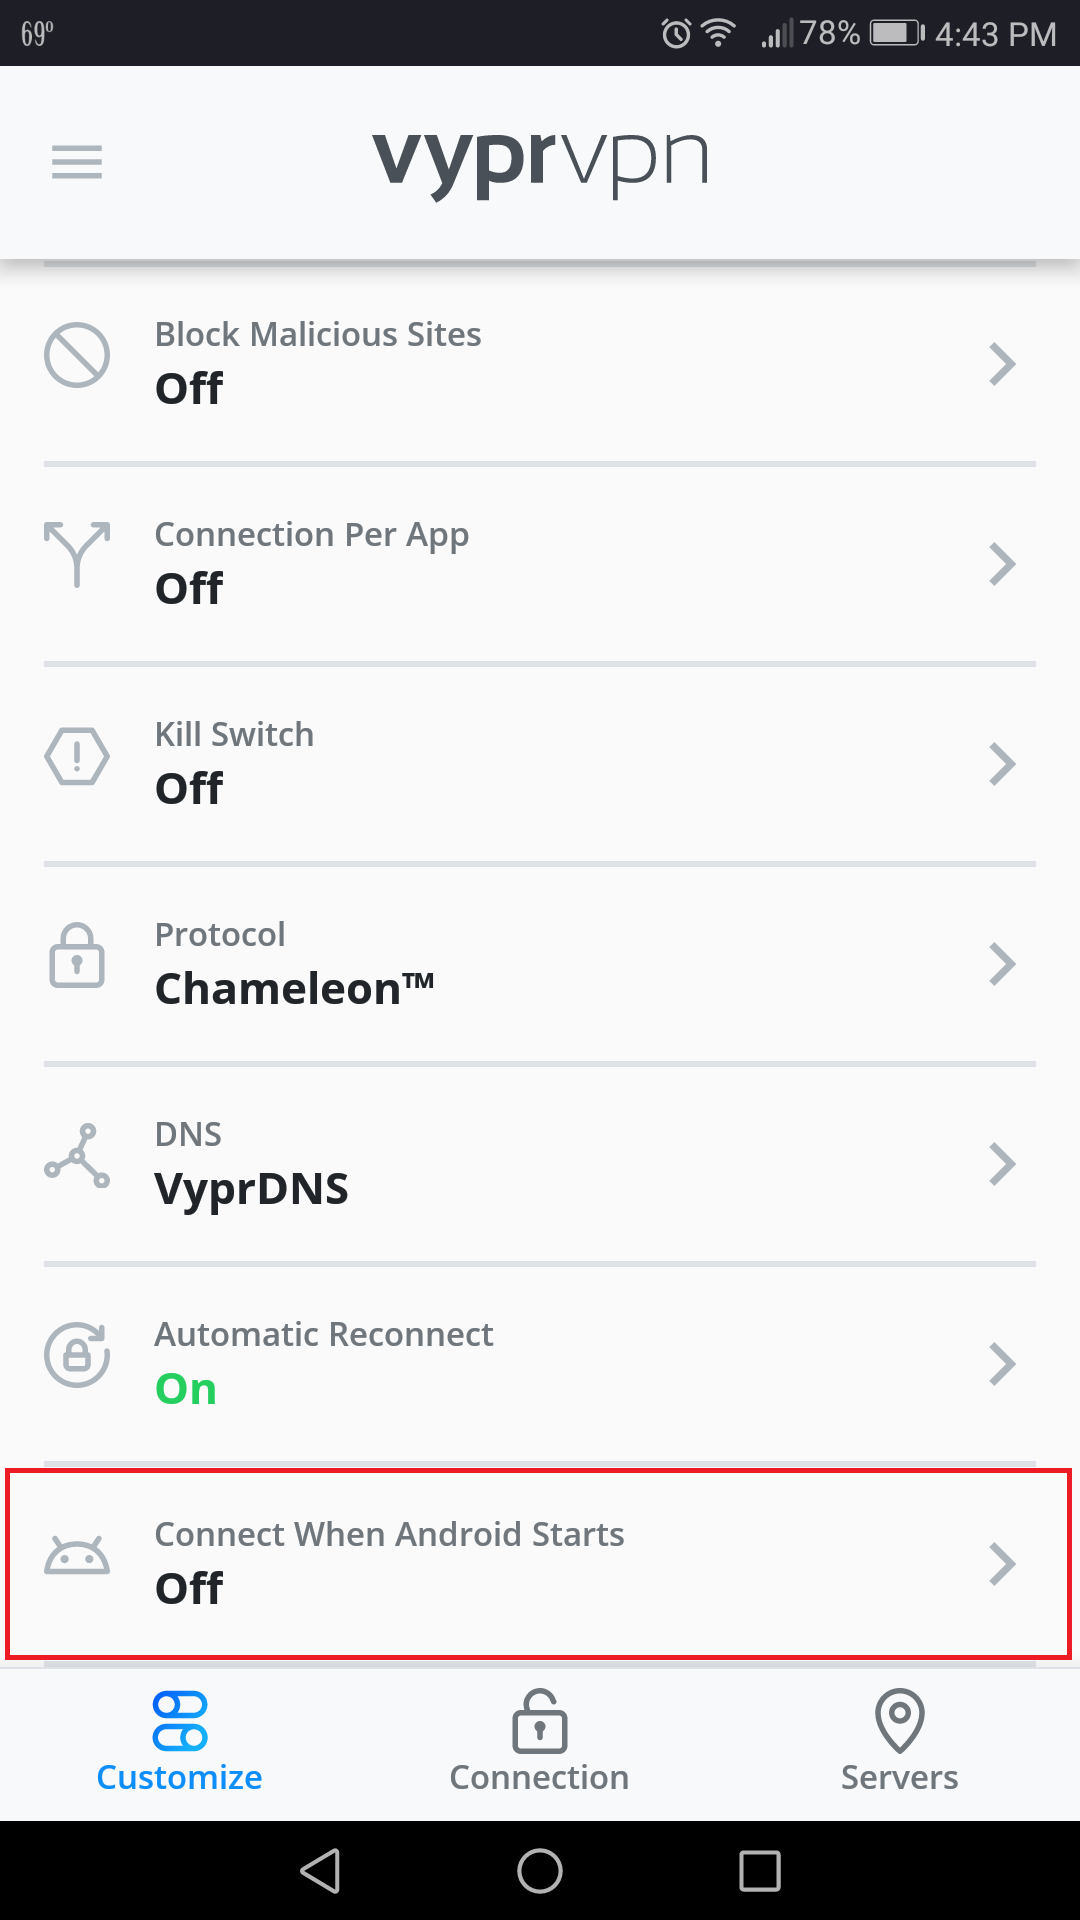 Vypr_App_-_Customize_Menu_Scrolled_Down_-_Connect_When_Android_Starts_Selected.png